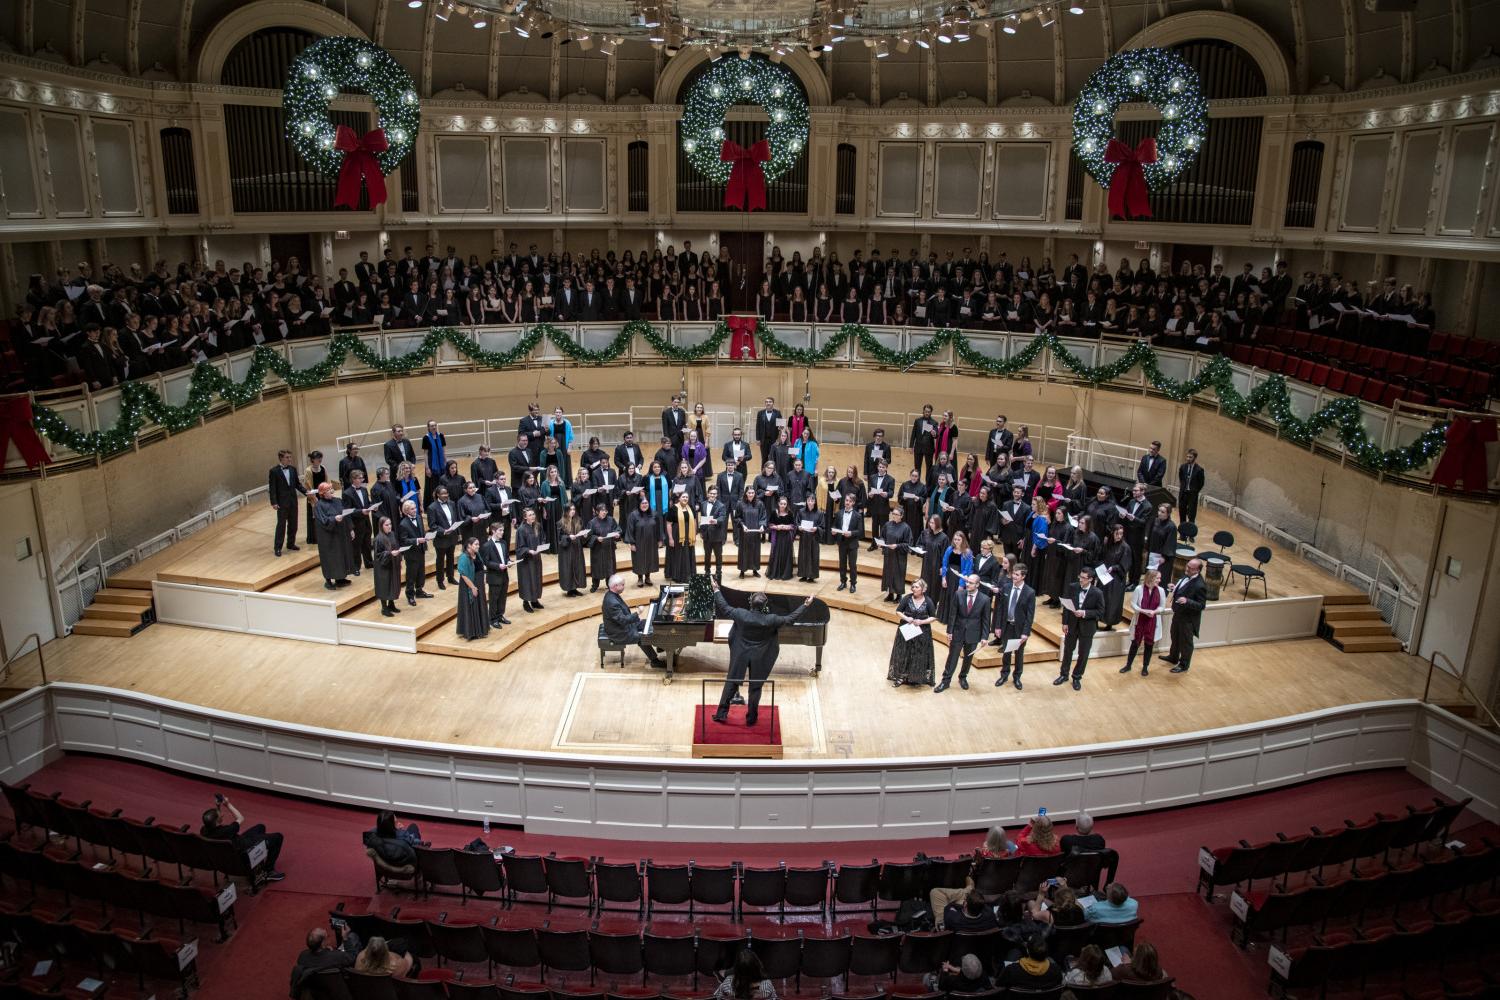 The <a href='http://4d5p.4dian8.com'>bv伟德ios下载</a> Choir performs in the Chicago Symphony Hall.